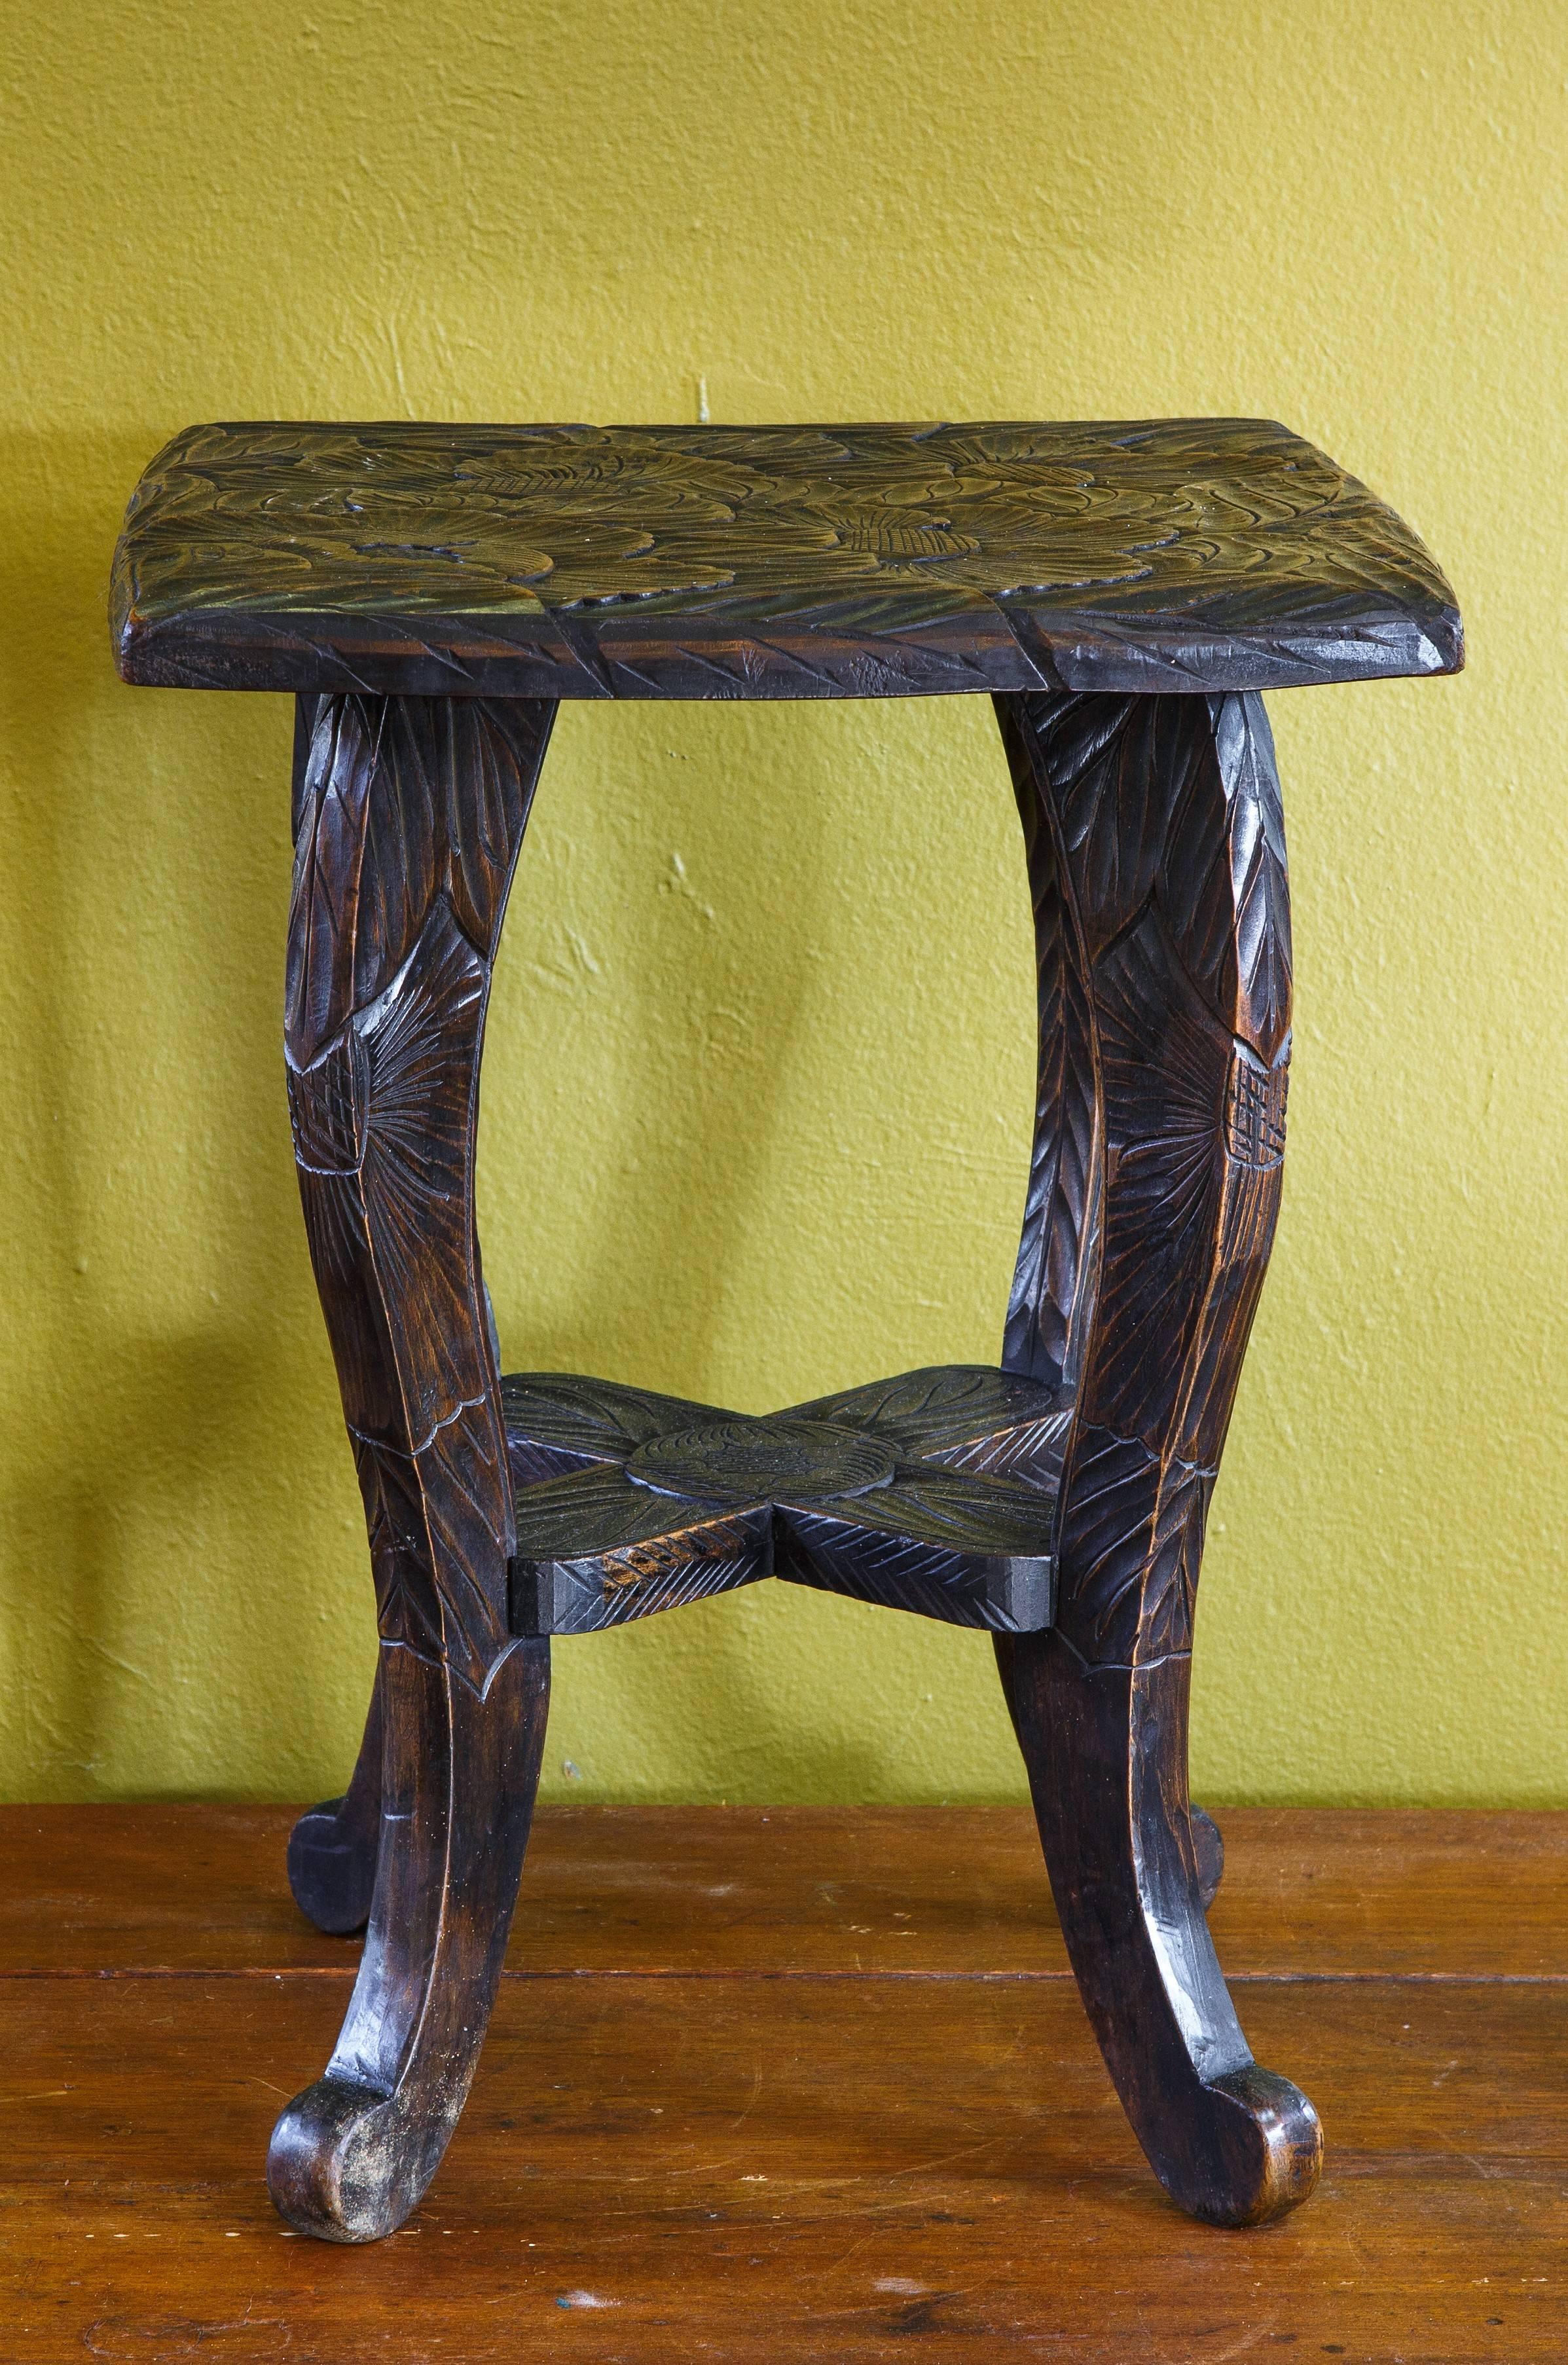 Wonderful, hand-carved floral stool/table. An exuberant stylized flower and leaf pattern covers the top of the table. A simpler corresponding
pattern continues down the legs.